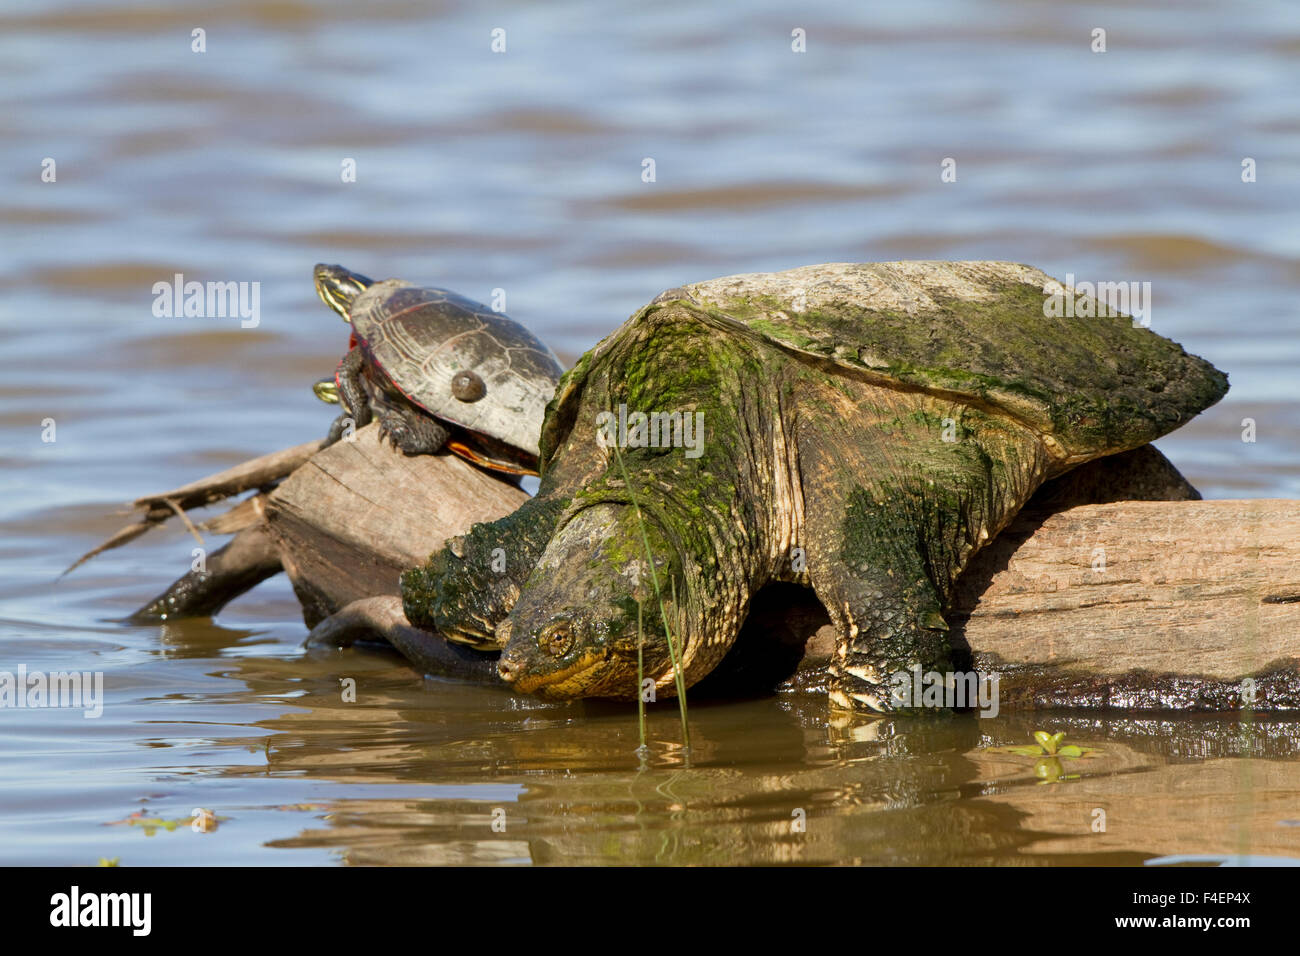 State Natural Area, Turtle (Chelydra serpentina) on log in wetland, Marion Co., IL Stock Photo